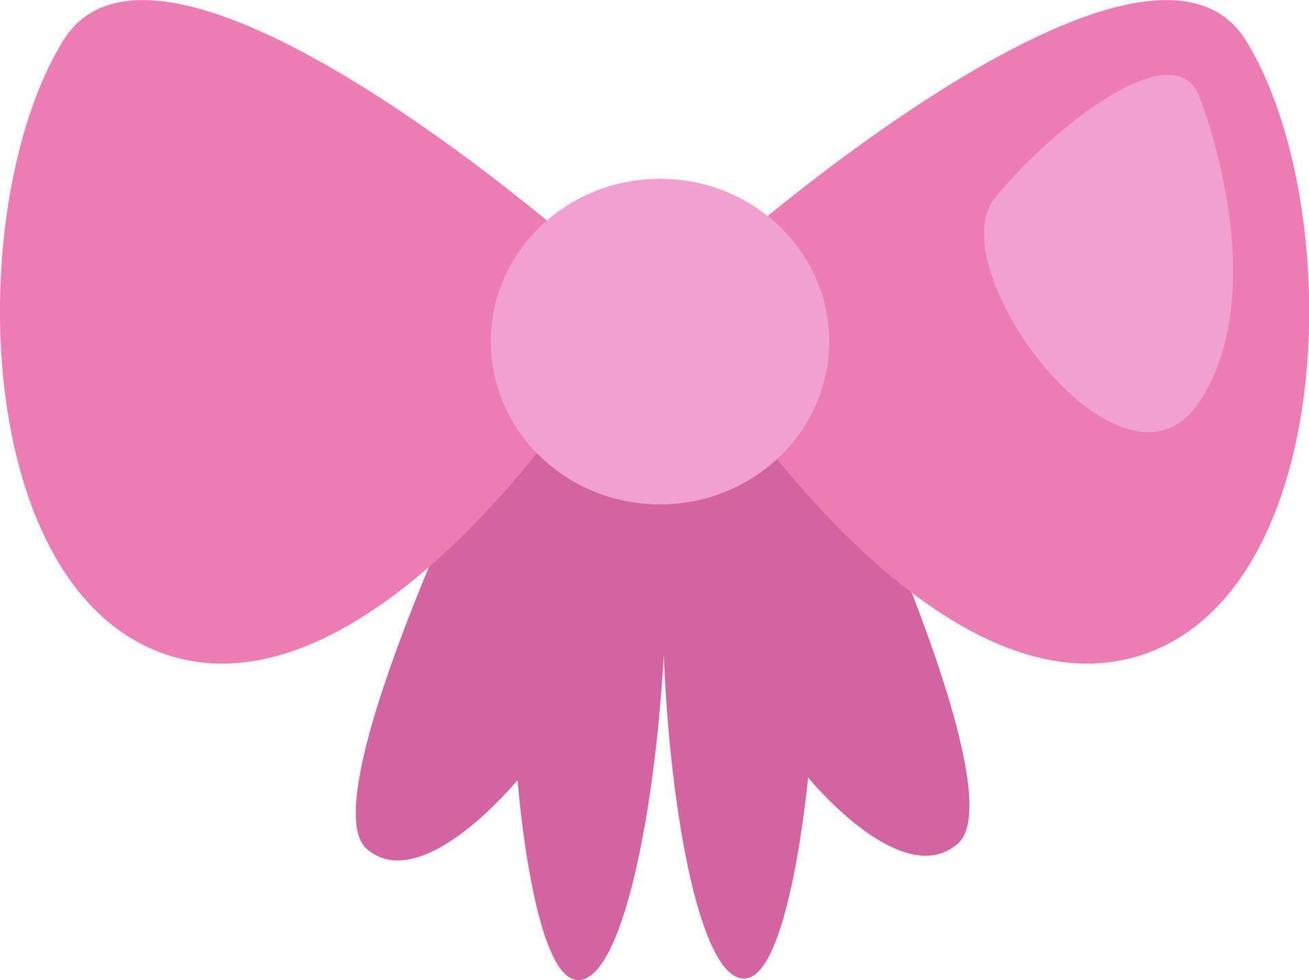 Childhood pink bow, icon, vector on white background.